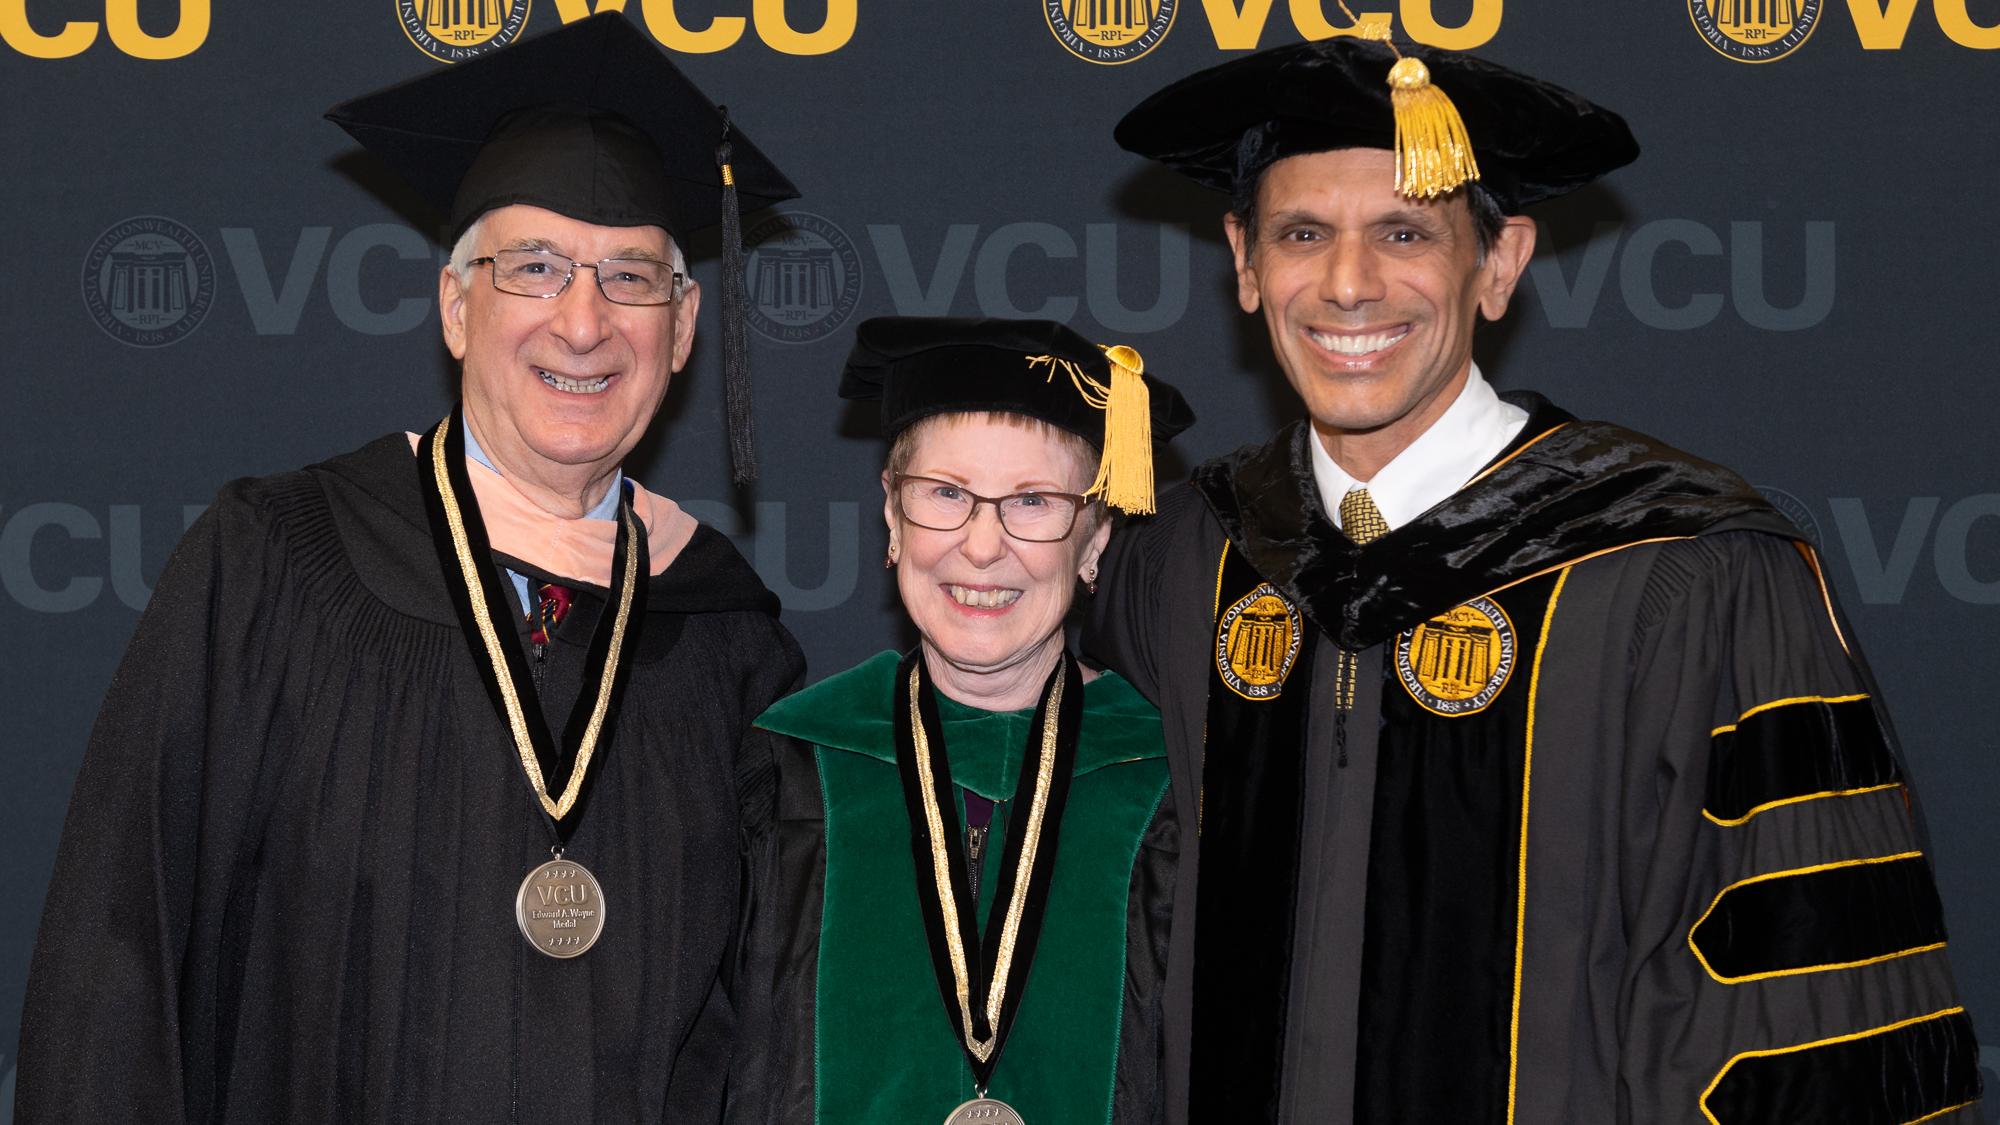 Family Medicine alumna and donor honored at VCU Commencement